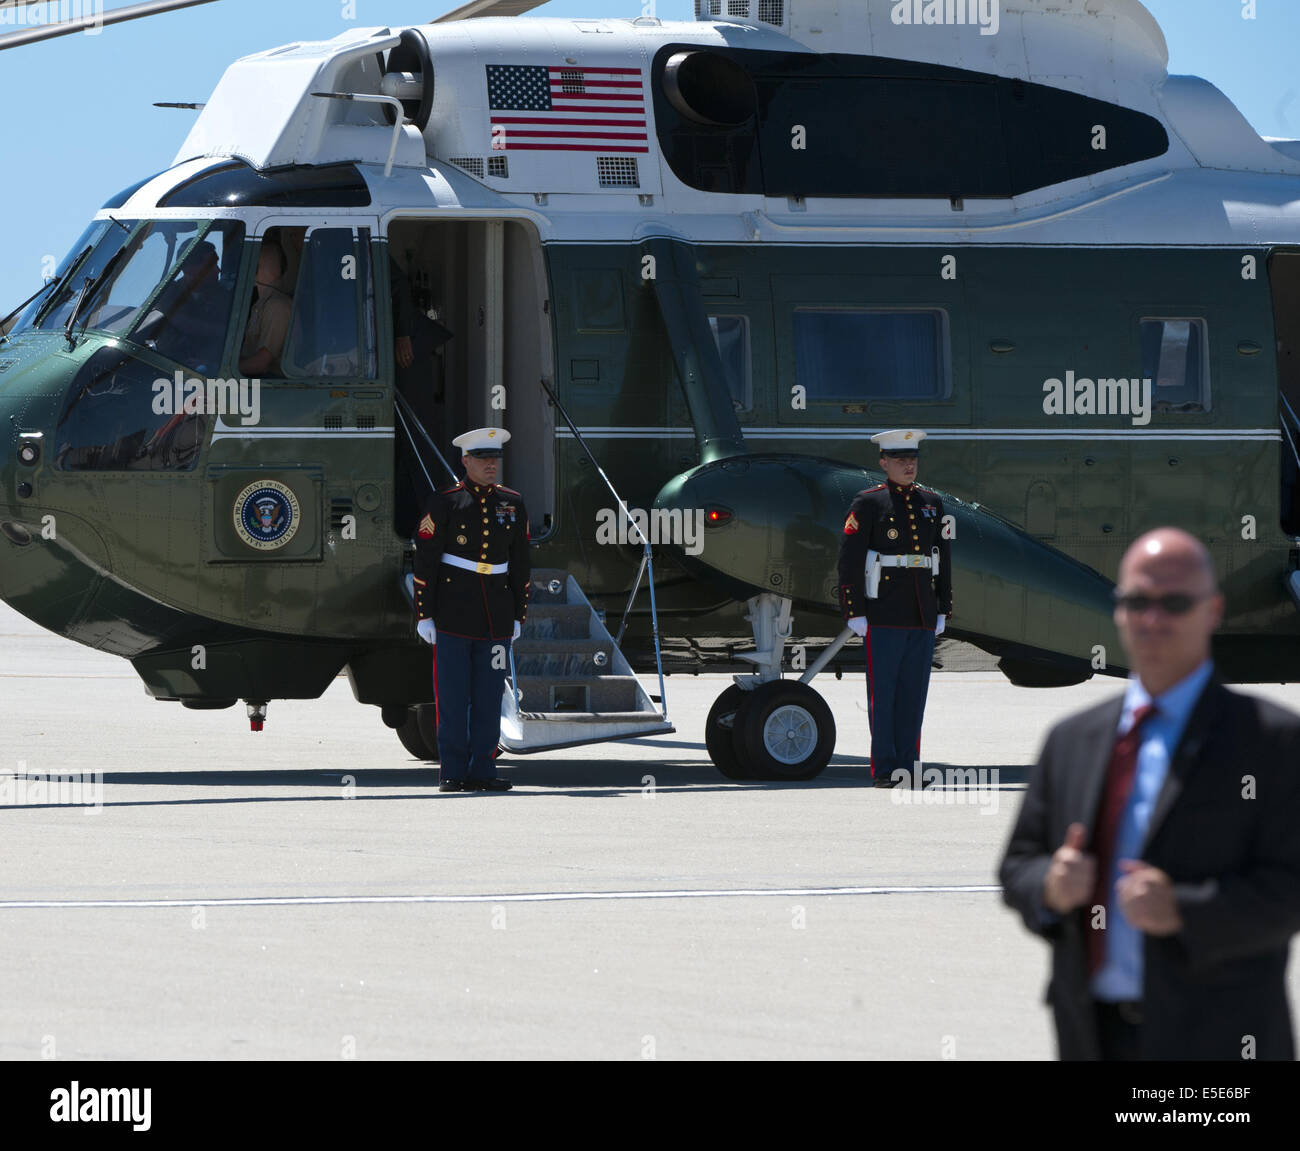 July 23, 2014 - Los Angeles, California, U.S - Marine One --- US Marines from HMX-1 hold their position alongside Marine One after receiving President Barack Obama on board at LAX on Wednesday July 23, 2014.  Sikorsky's SH-3 Sea King helicopter has been in use by the US Marine Corps' HMX-1 squadron as the first choice for Marine One since not long after it was placed in service by the US Navy in 1961.  The familiar metallic green with white top Sea King is transported, along with the presidential limousine and other large equipment via a set of several C-17 Boeing Globemaster transport aircraf Stock Photo